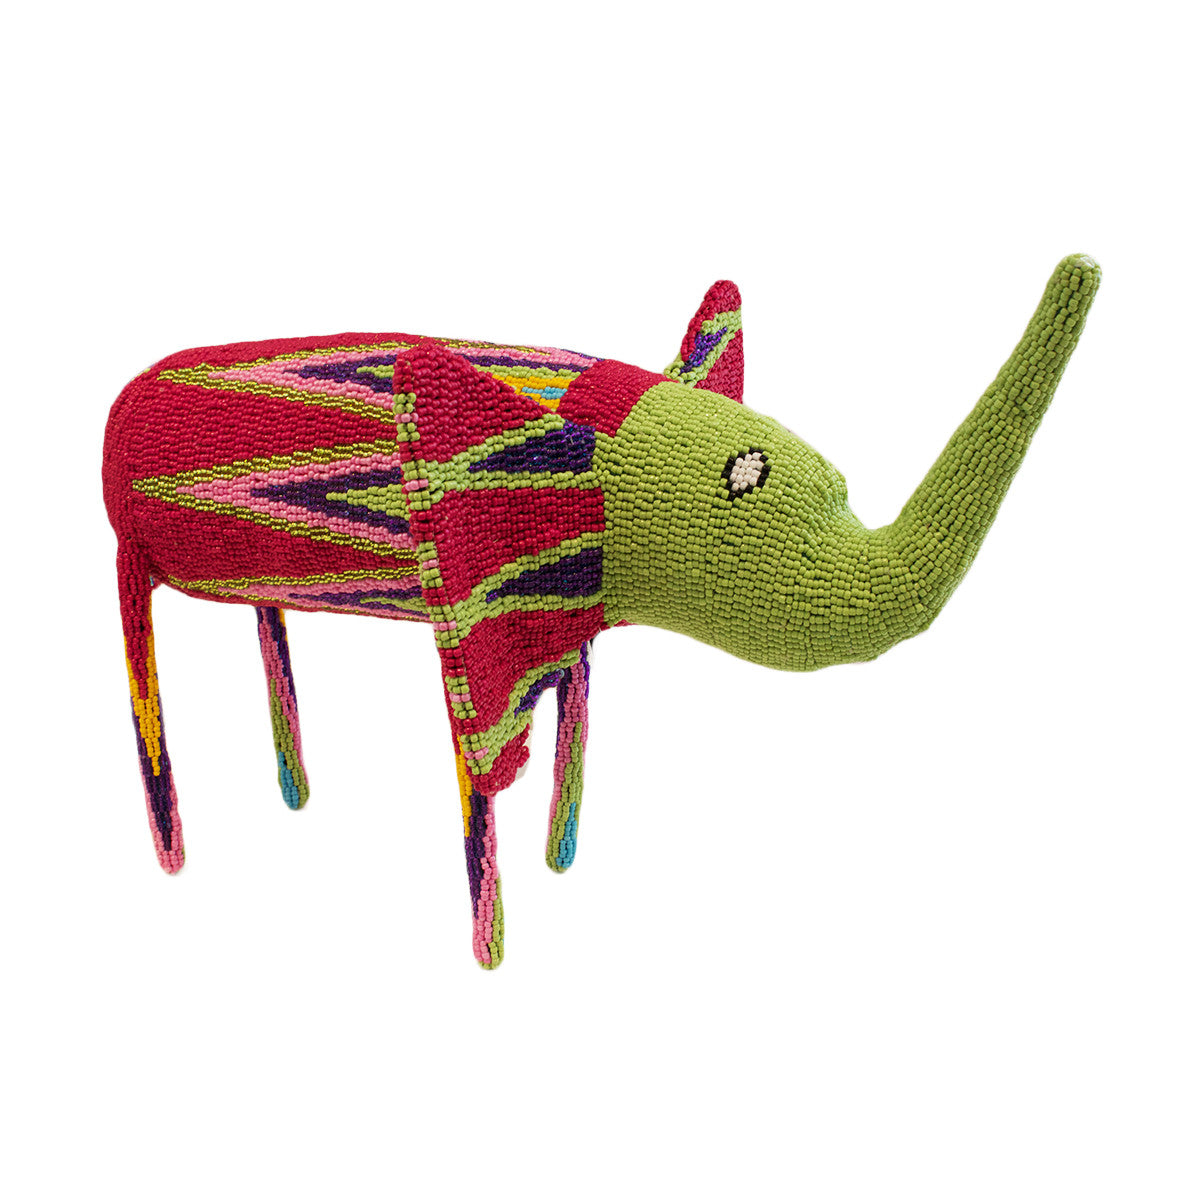 Beaded elephant handcrafted by female artisans in Africa. These joyful sculptures add whimsy and colour to any room.